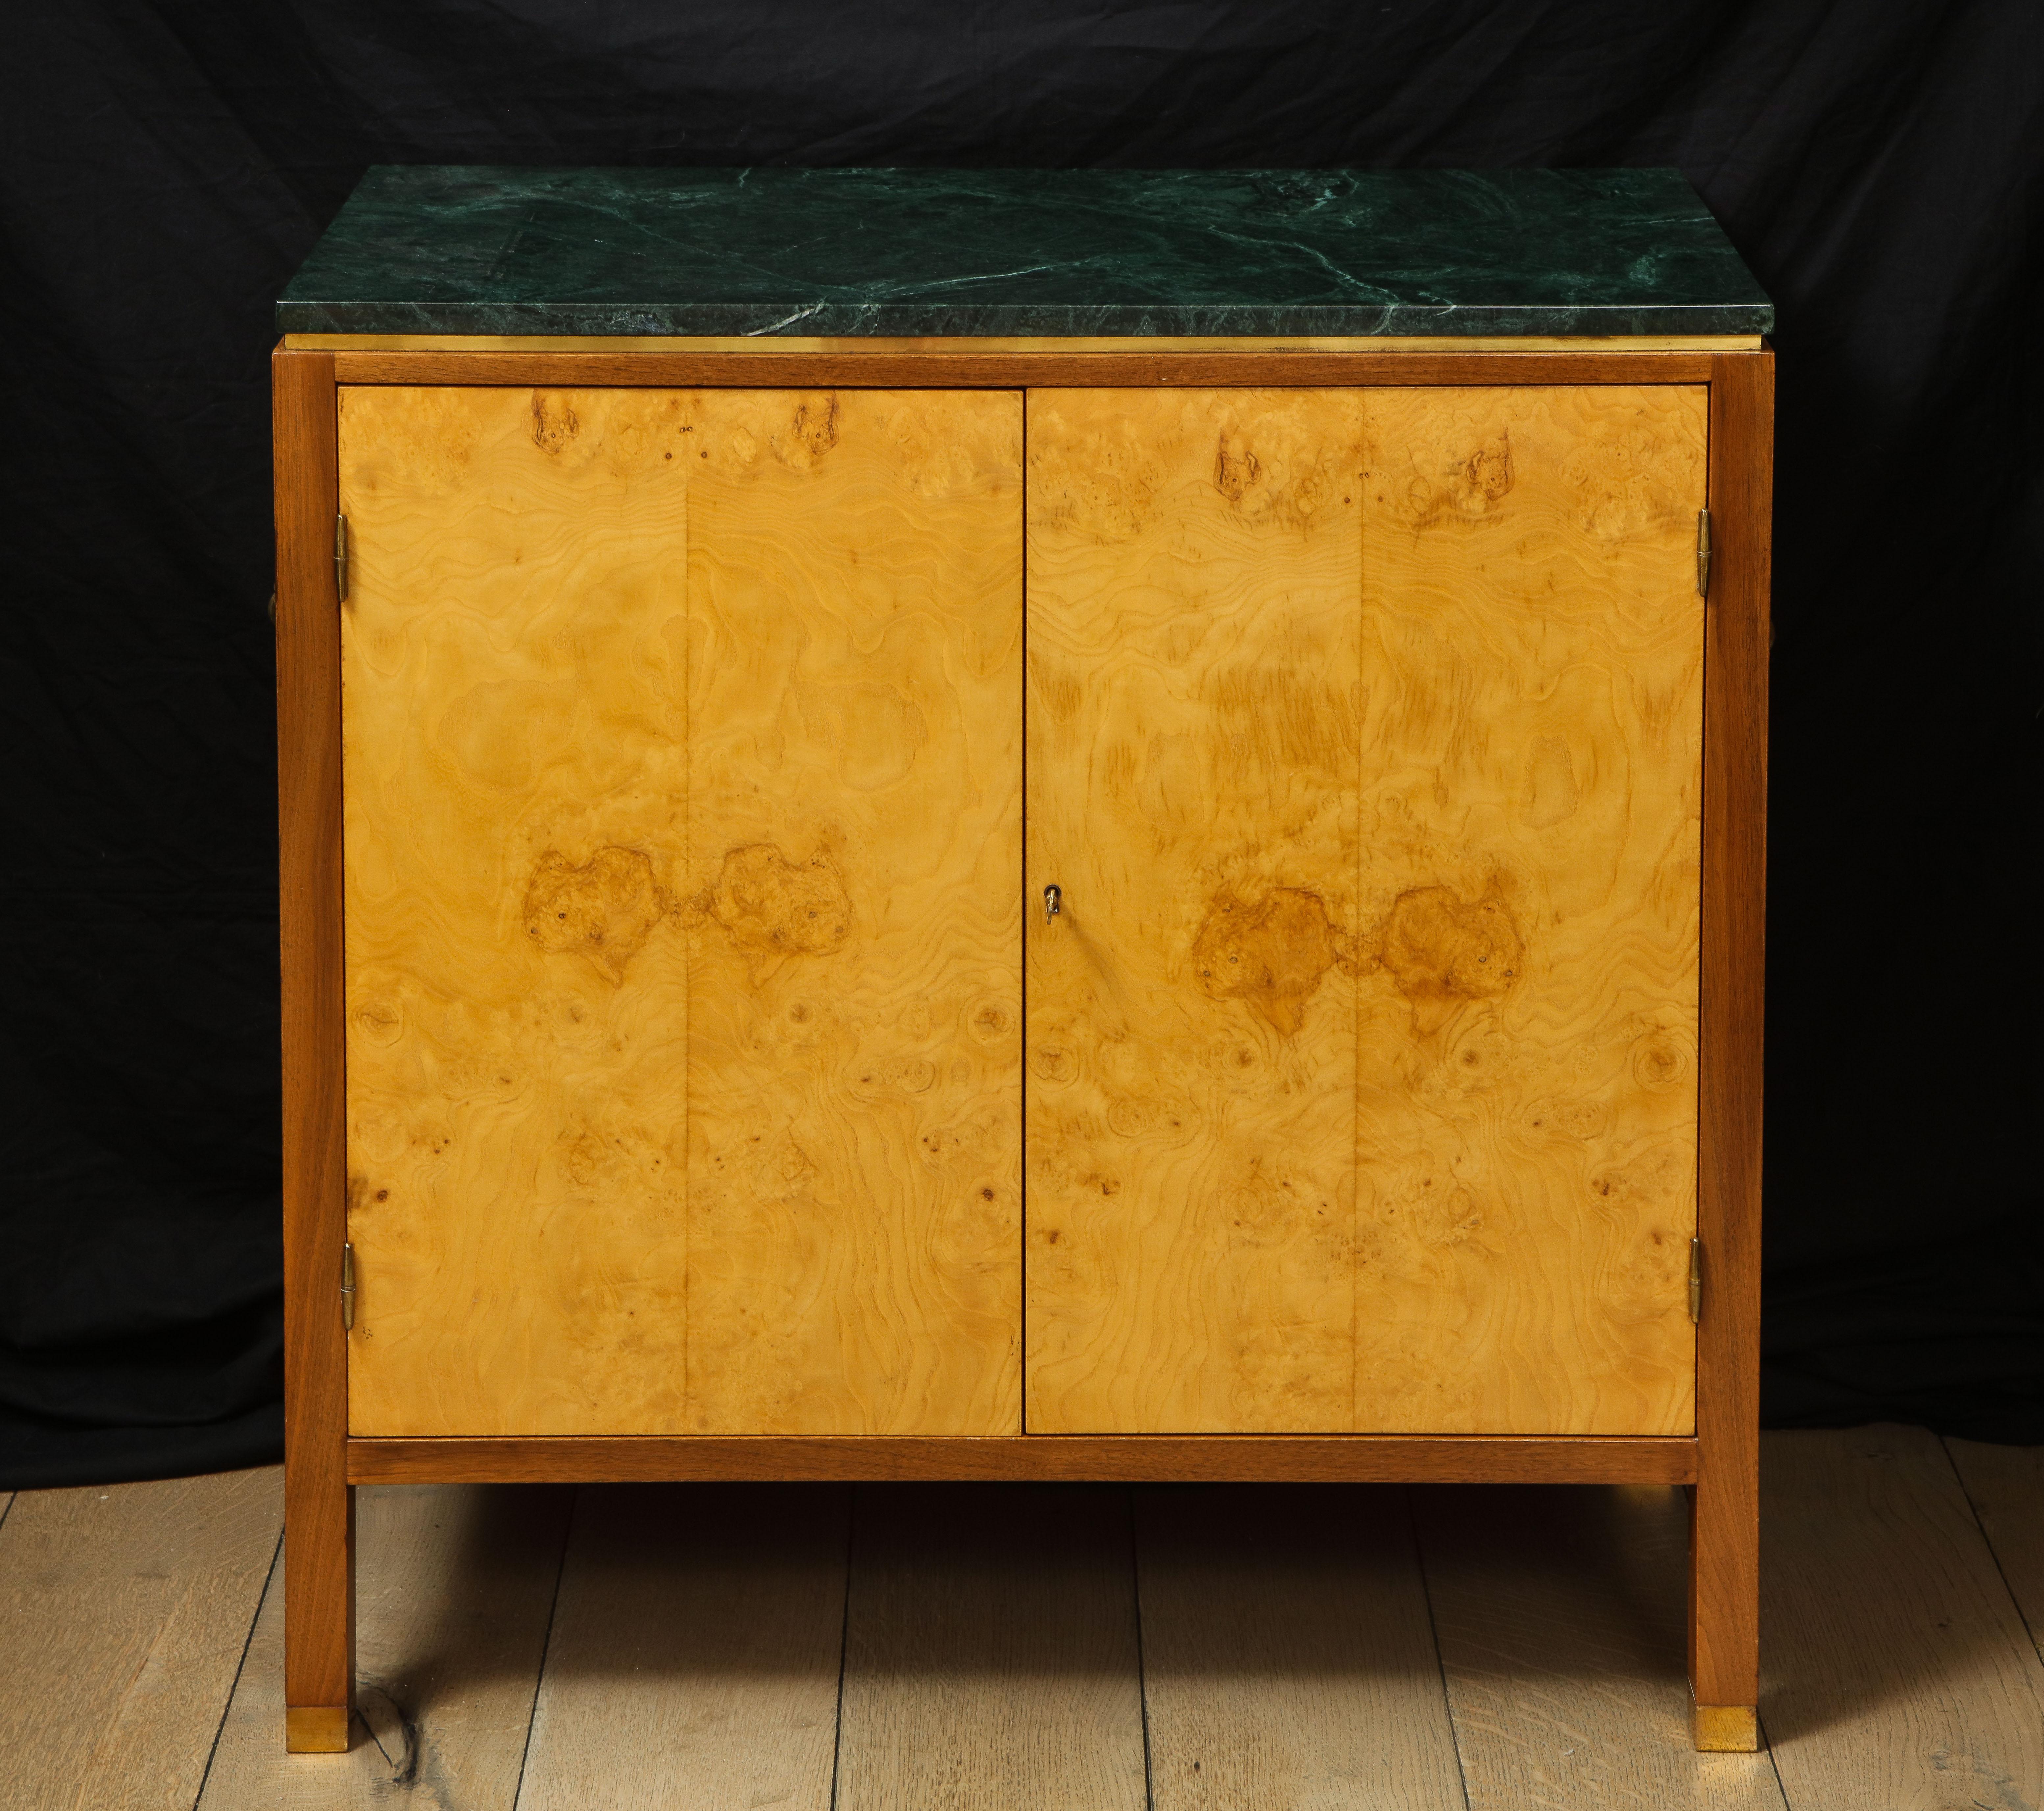 Beautiful green marble and burl cabinet, believed to be an Ed Wormly piece for Dunbar. 
Beautiful condition.